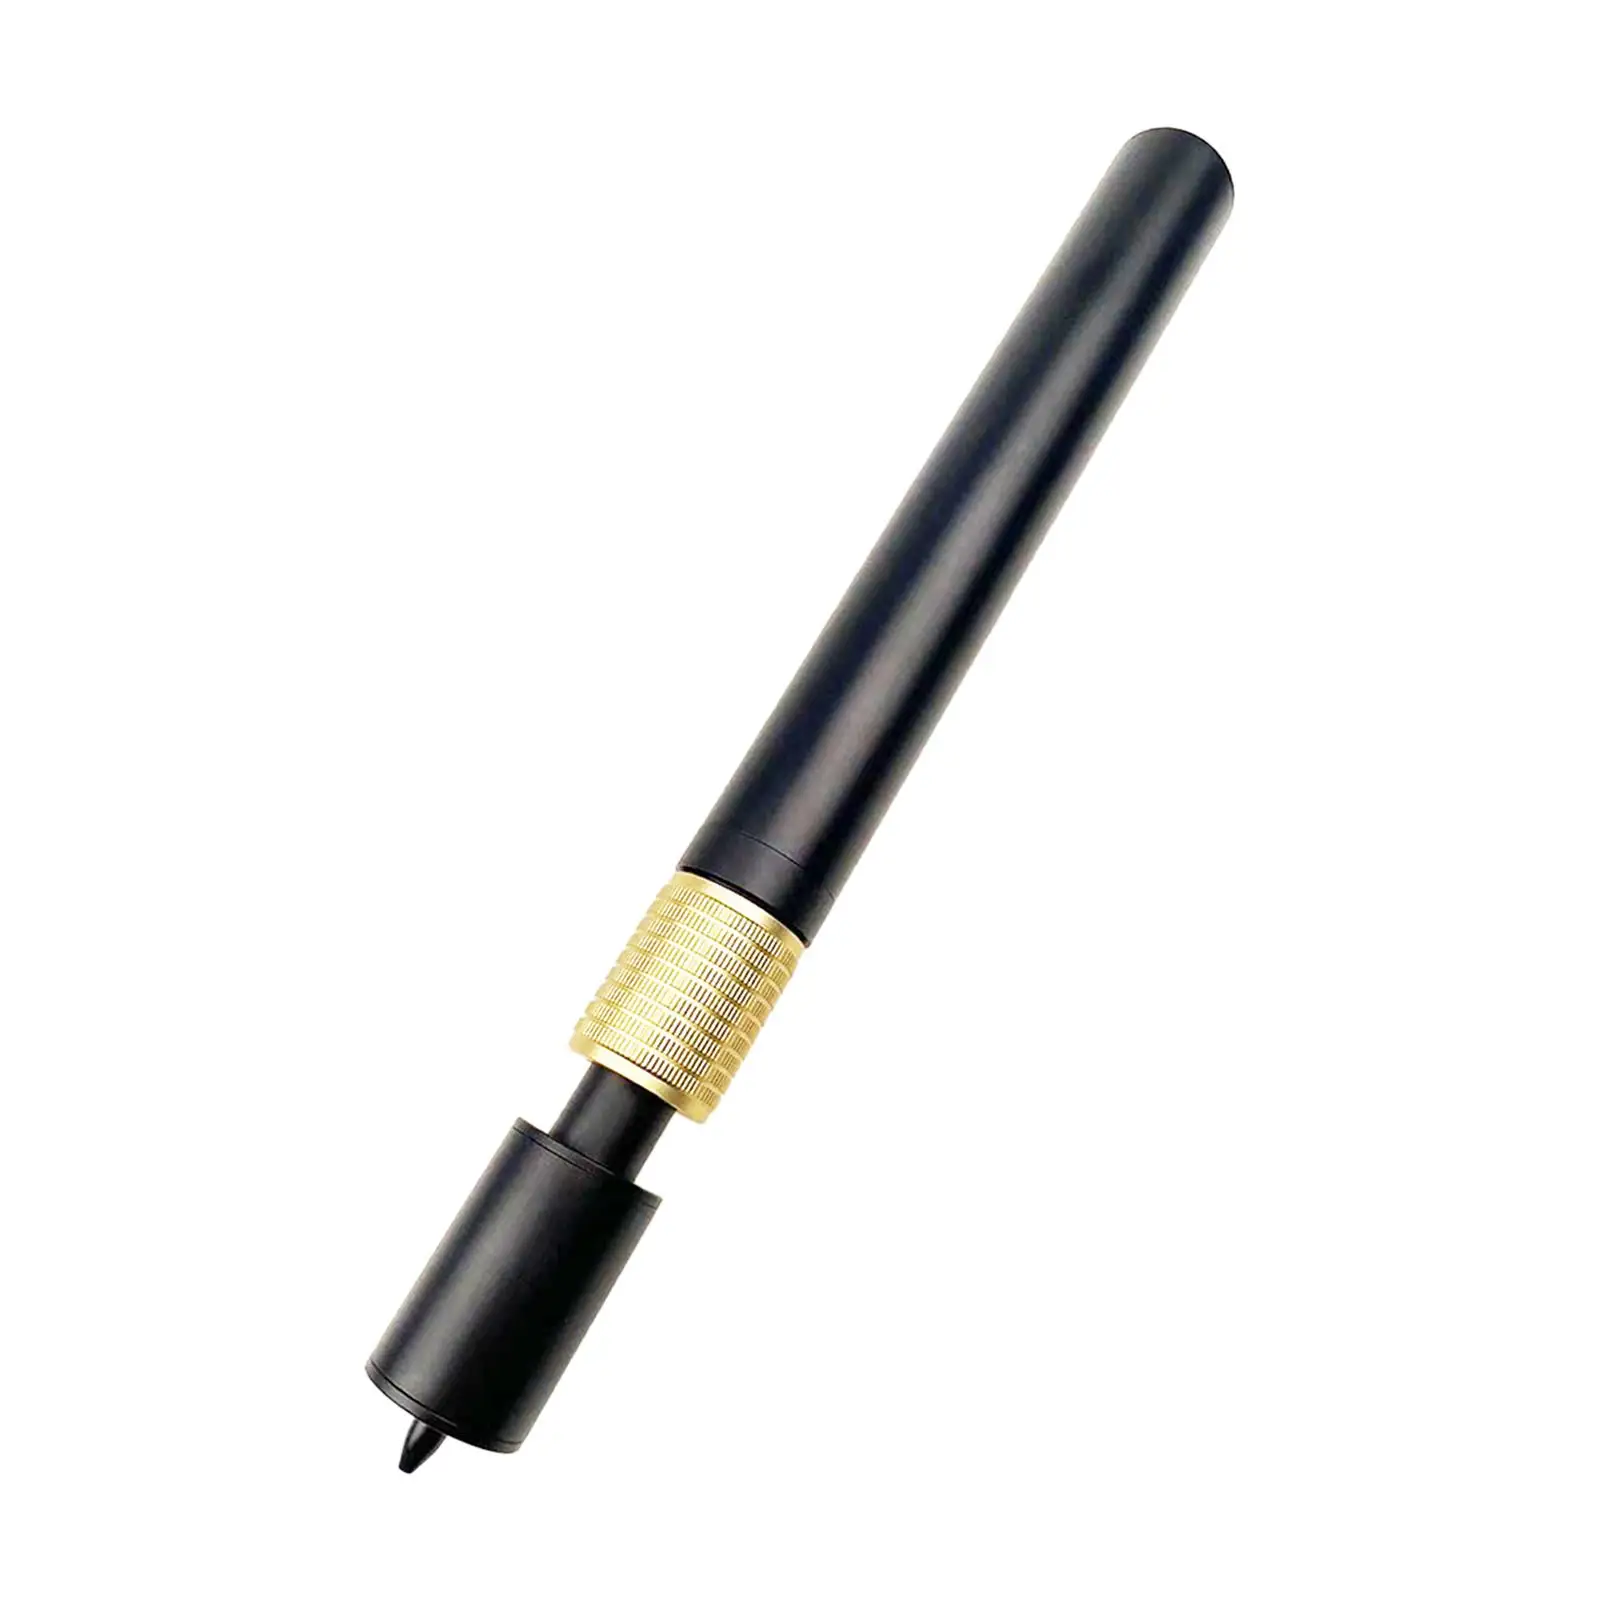 Telescopic Billiards Pool Cue Extension Compact Cue End Lengthener for Outdoor Snooker Billiard Practice Athlete Enthusiast